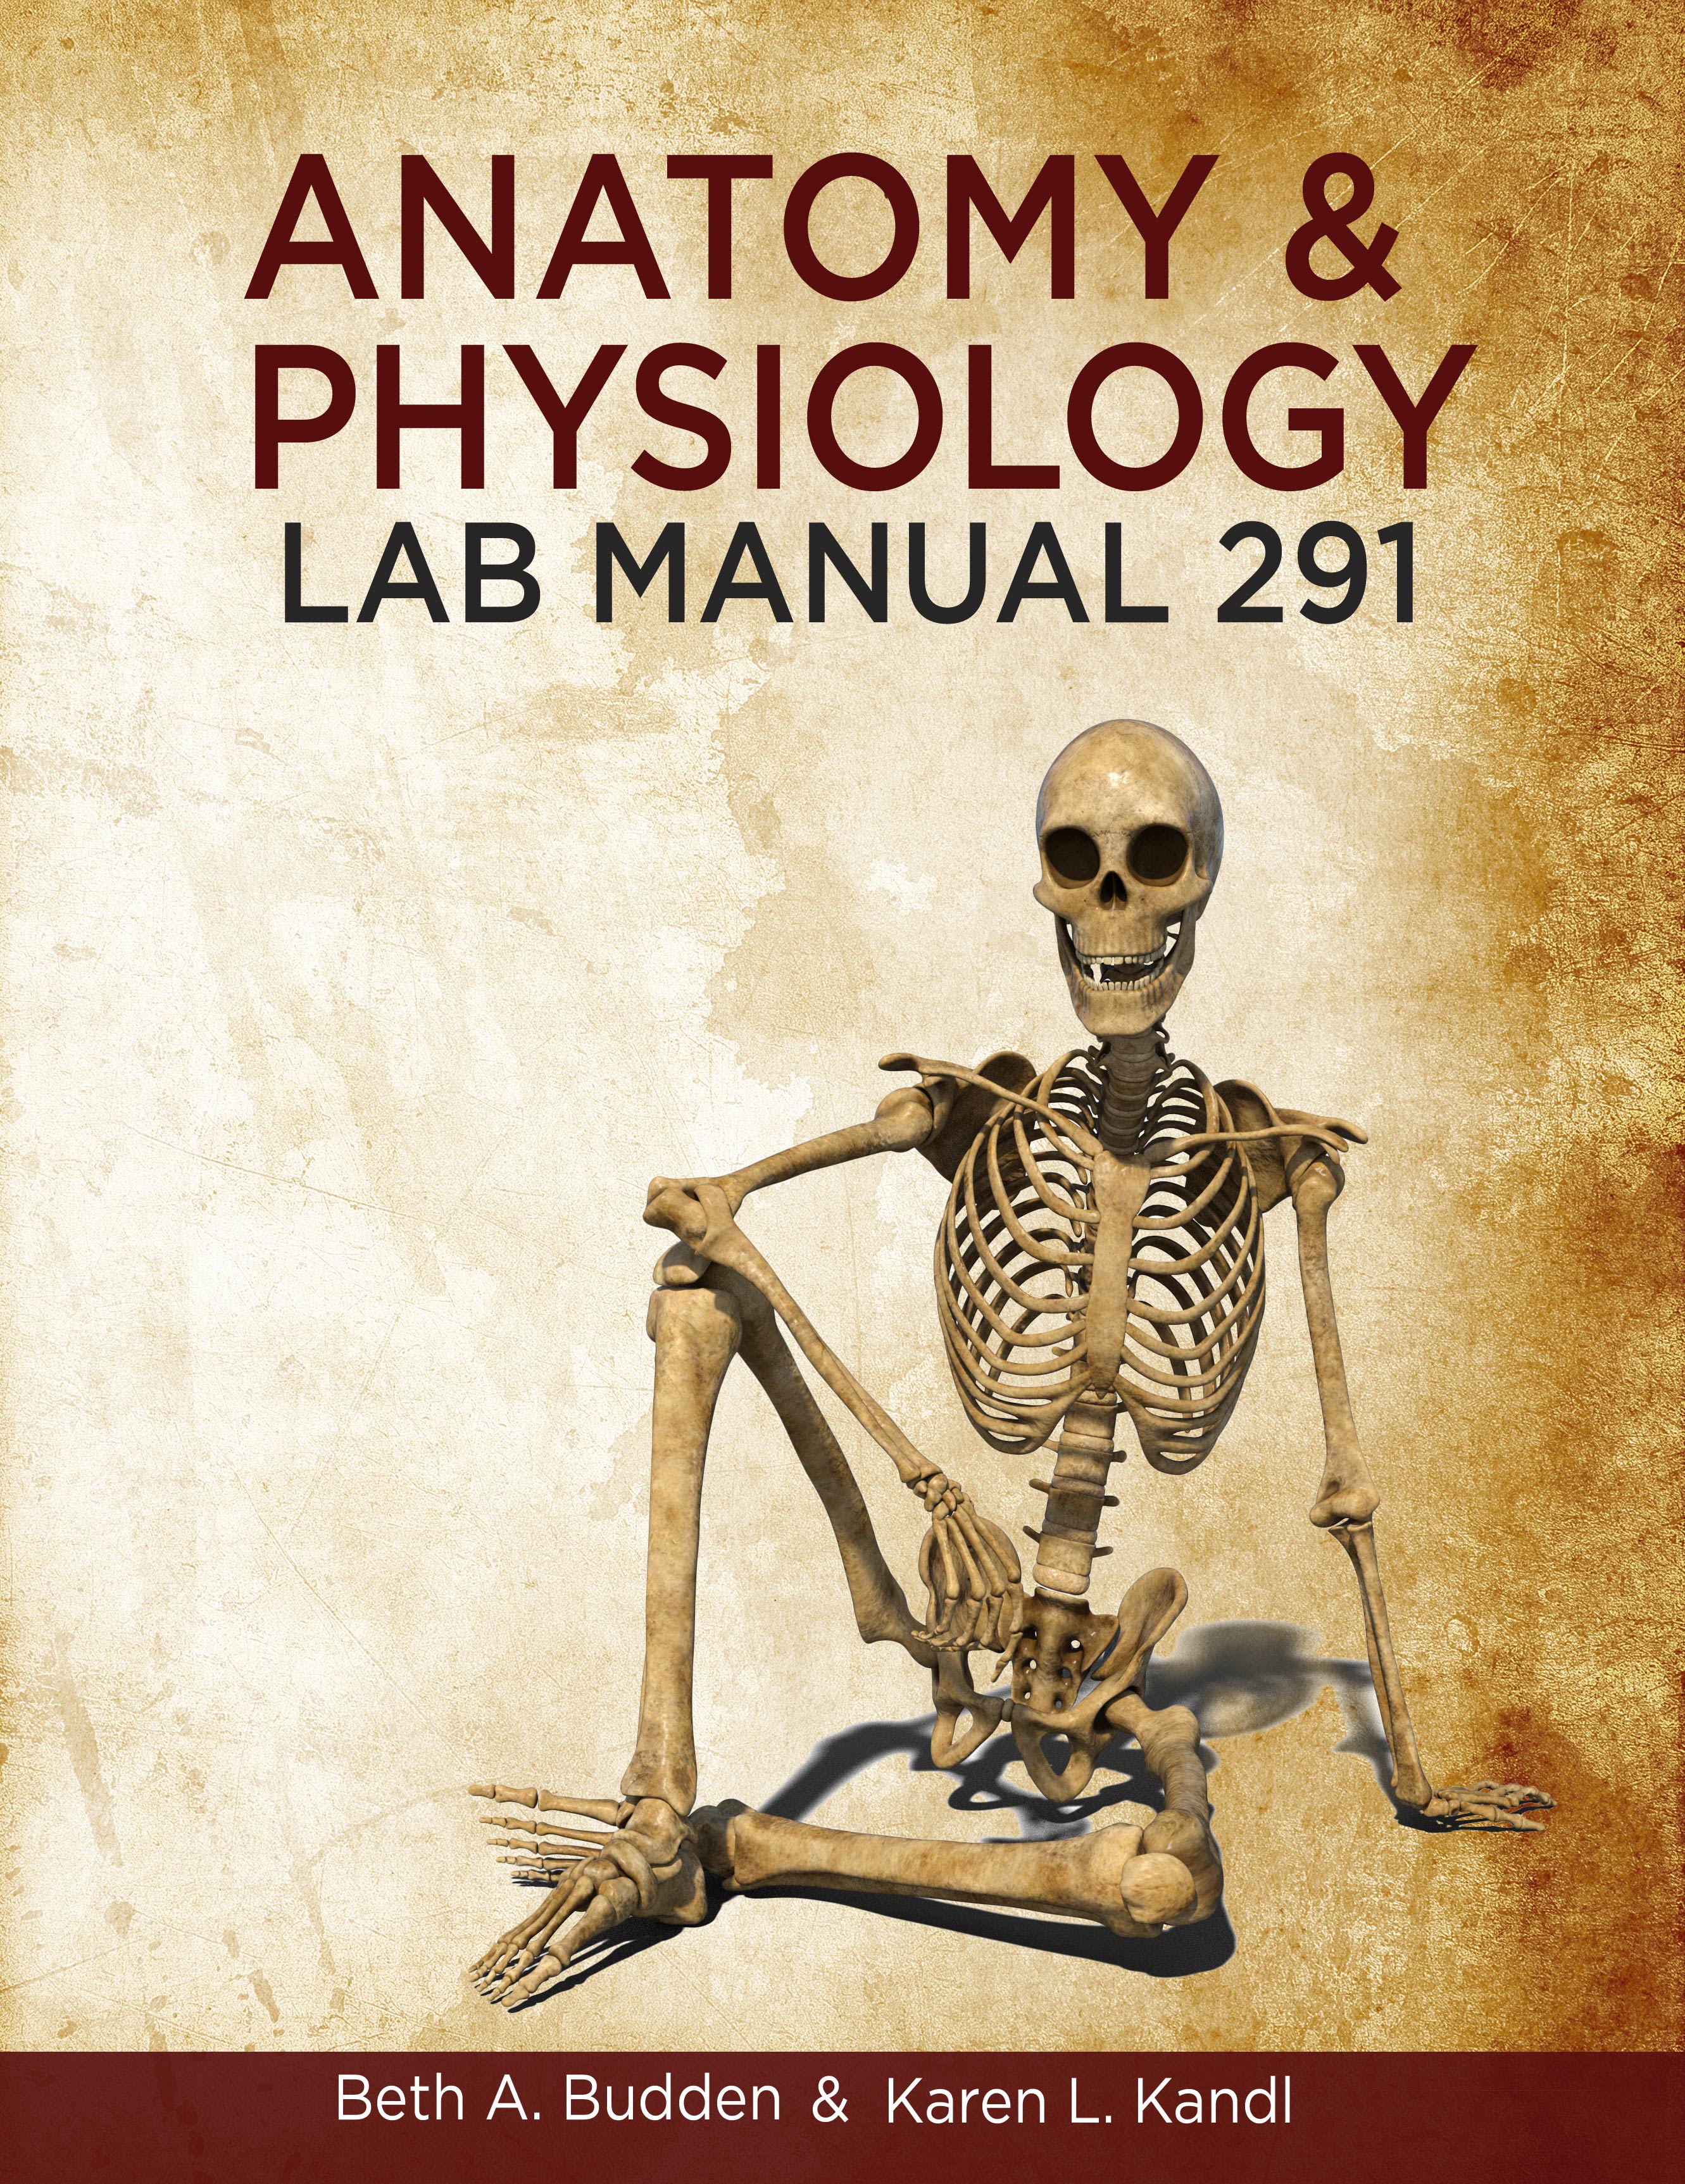 Product Details - Anatomy & Physiology I Lab Manual 291 | Great 